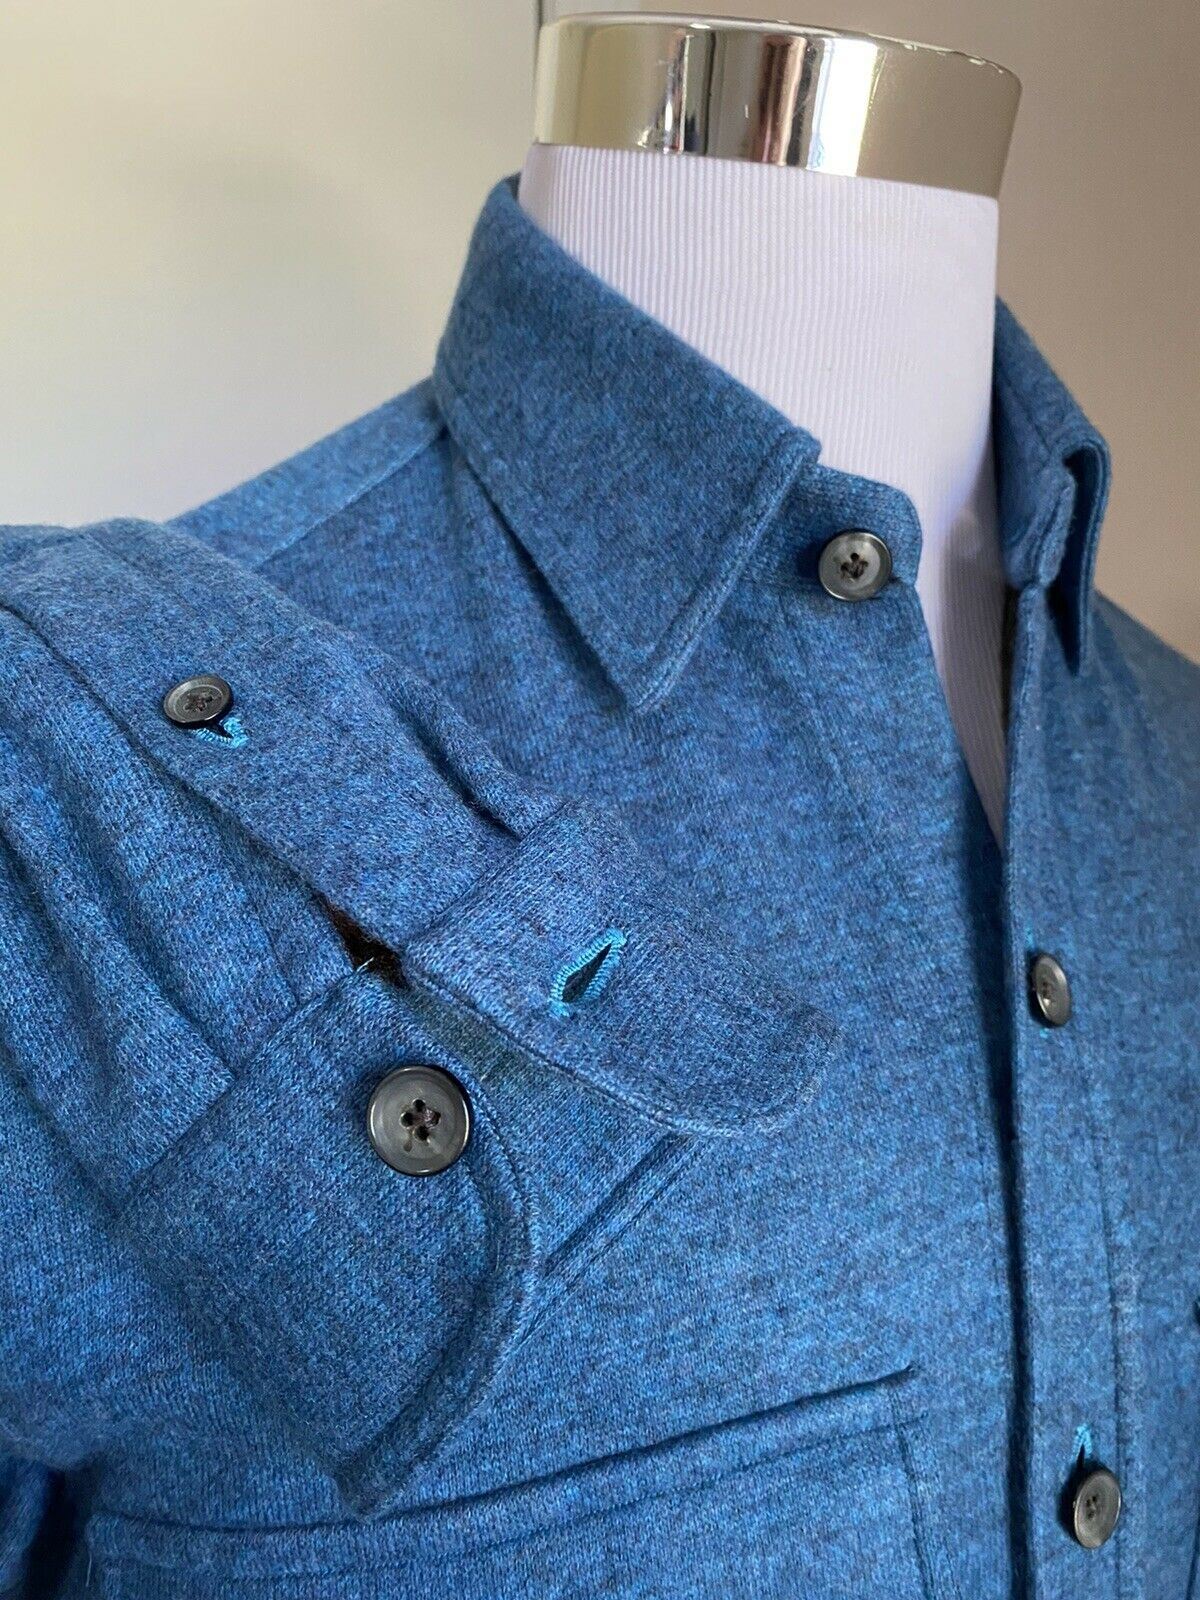 NWT $1350 Isaia Long Sleeve Cashmere Pullover Shirt Jacket Blue Size S-M